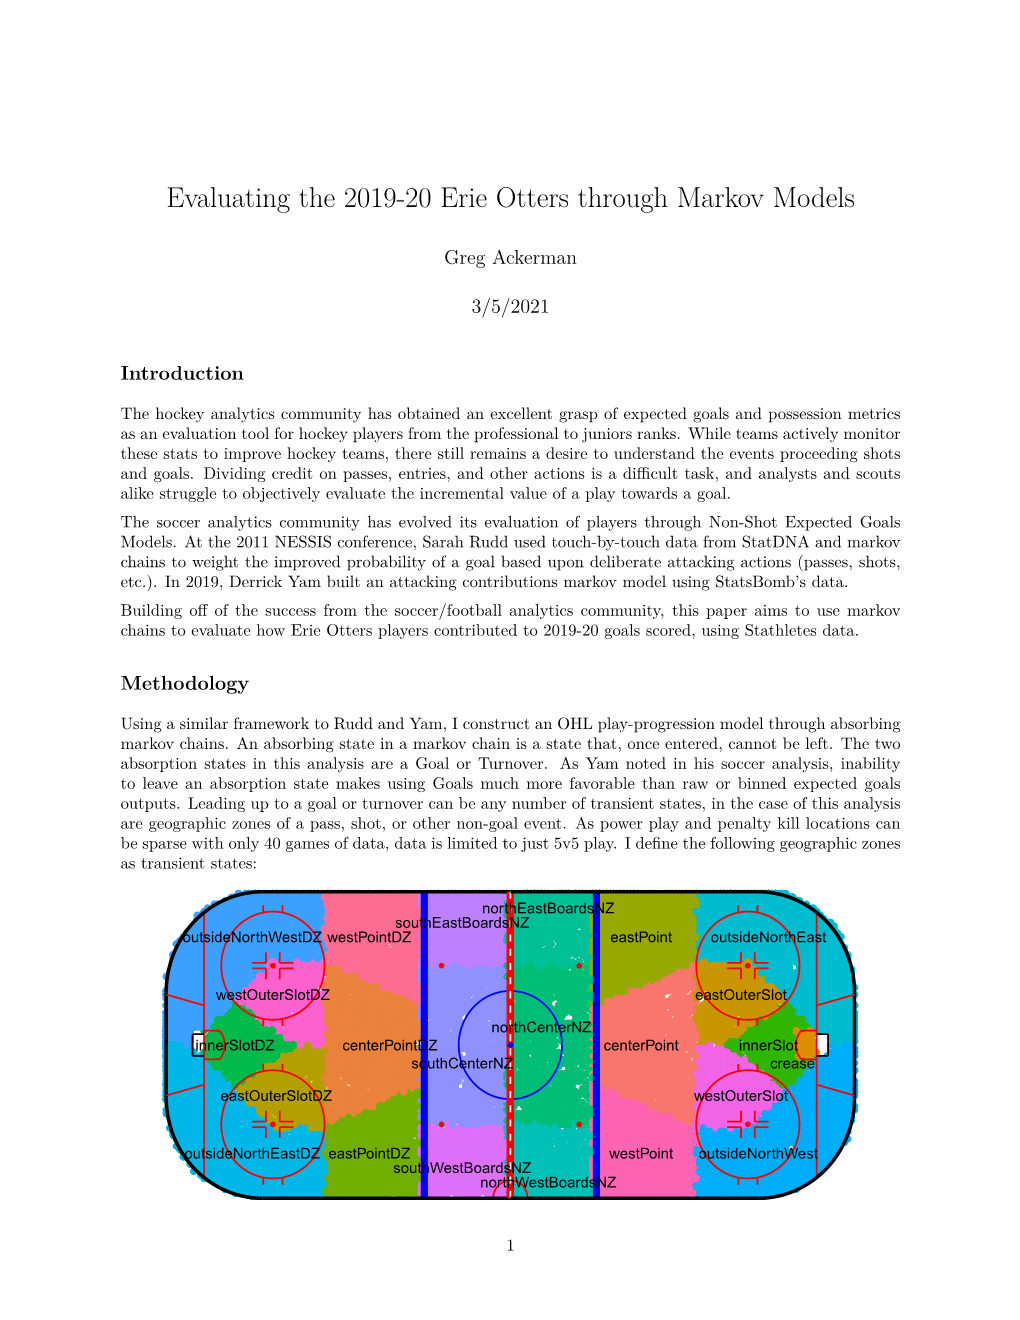 Evaluating the 2019-20 Erie Otters Through Markov Models